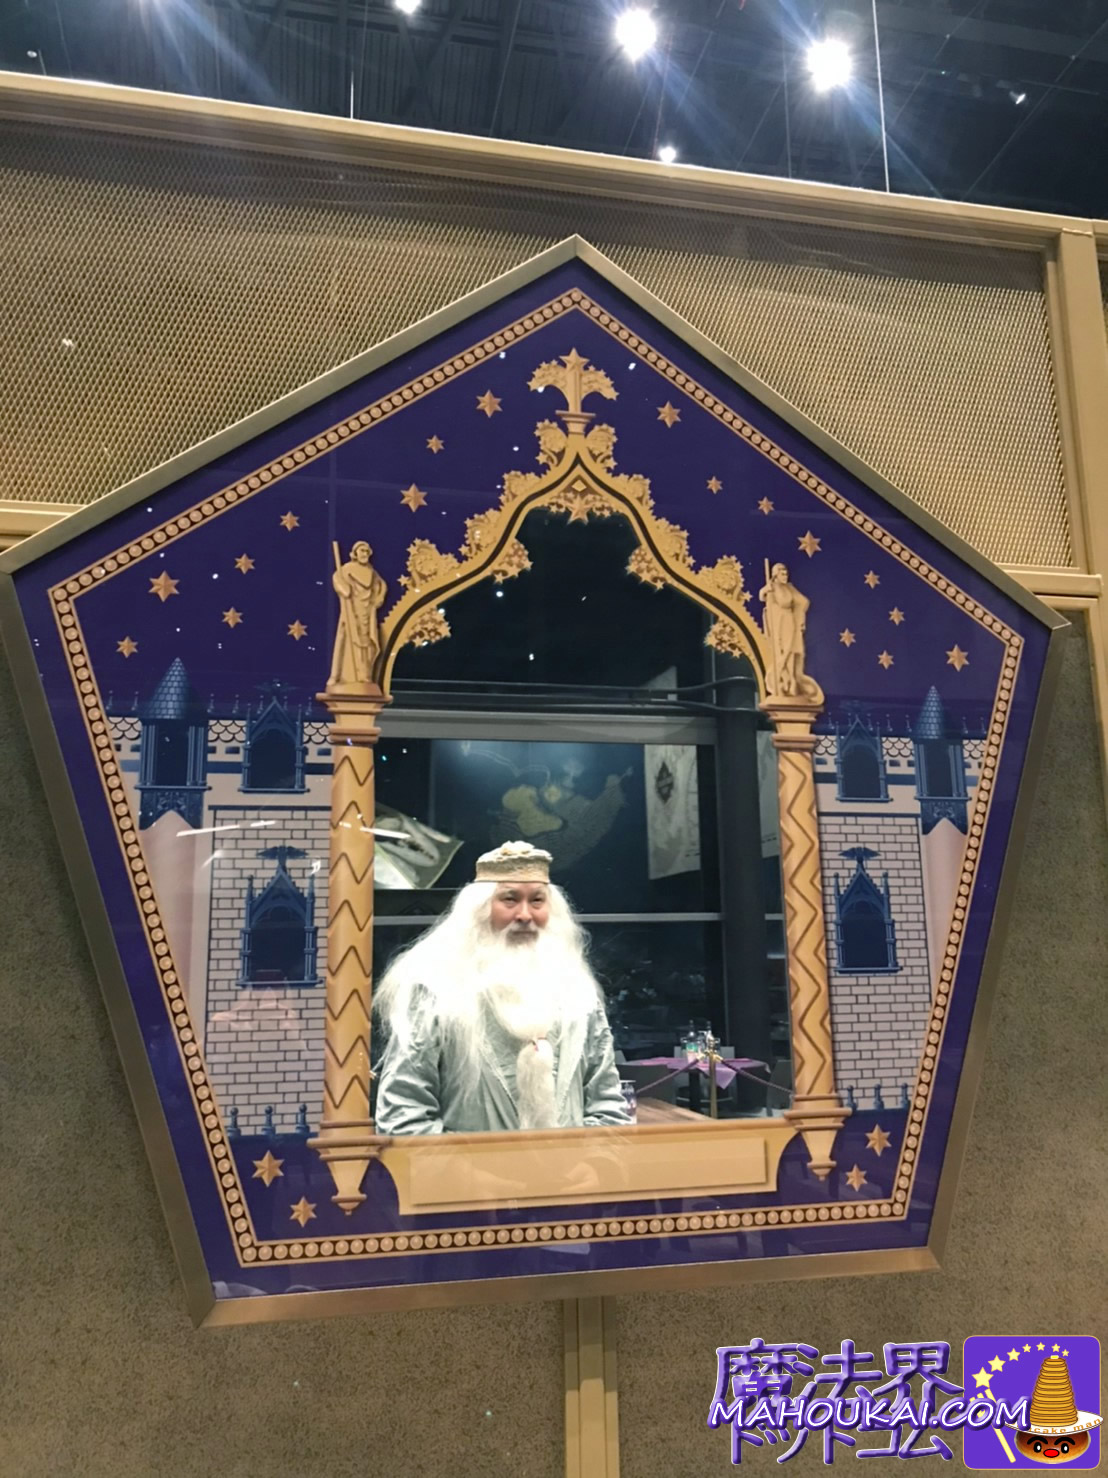 HIDDEN SPOT: Mirror that can become a wizard's great man card THE CHOCOLATE FROG CAFE  Frog Chocolate Cafe Harry Potter Studio Tour London